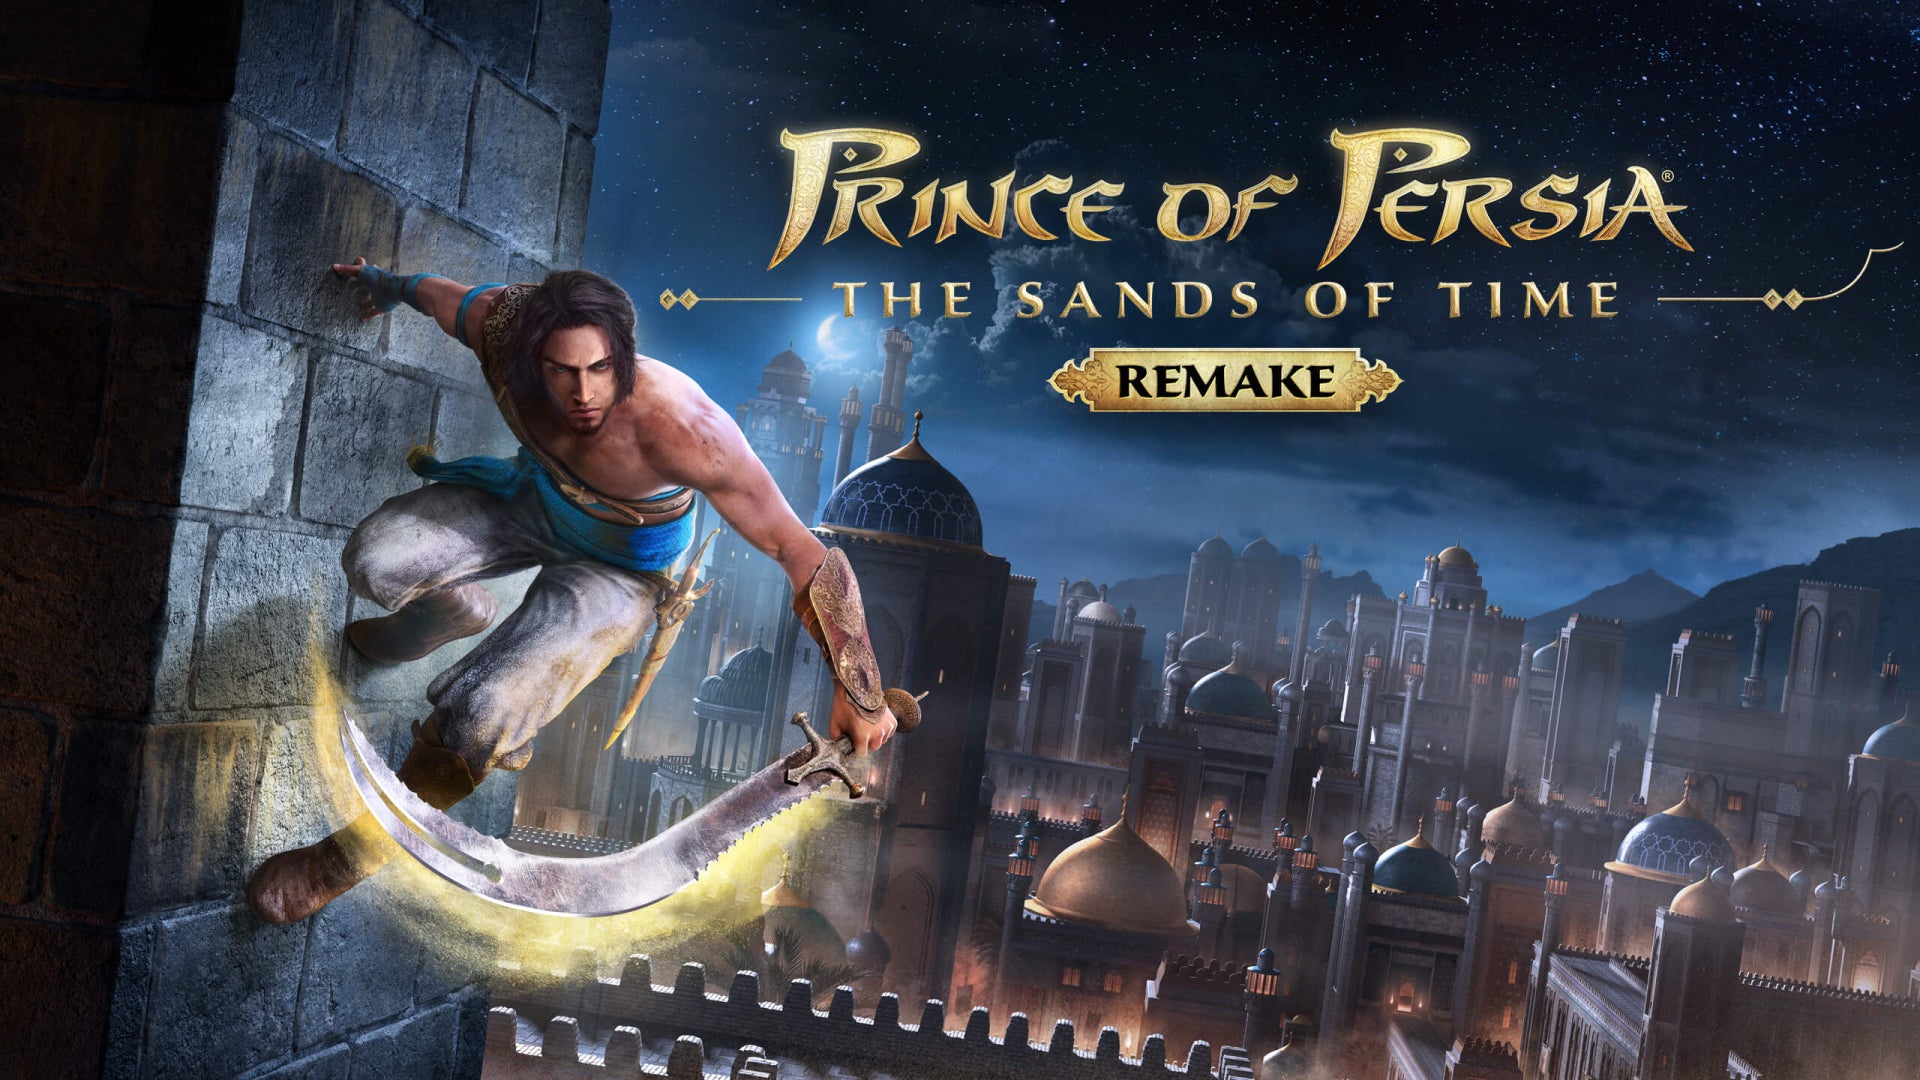 Image for Prince of Persia Remake pre-orders are being refunded — Ubisoft insists it's not cancelled